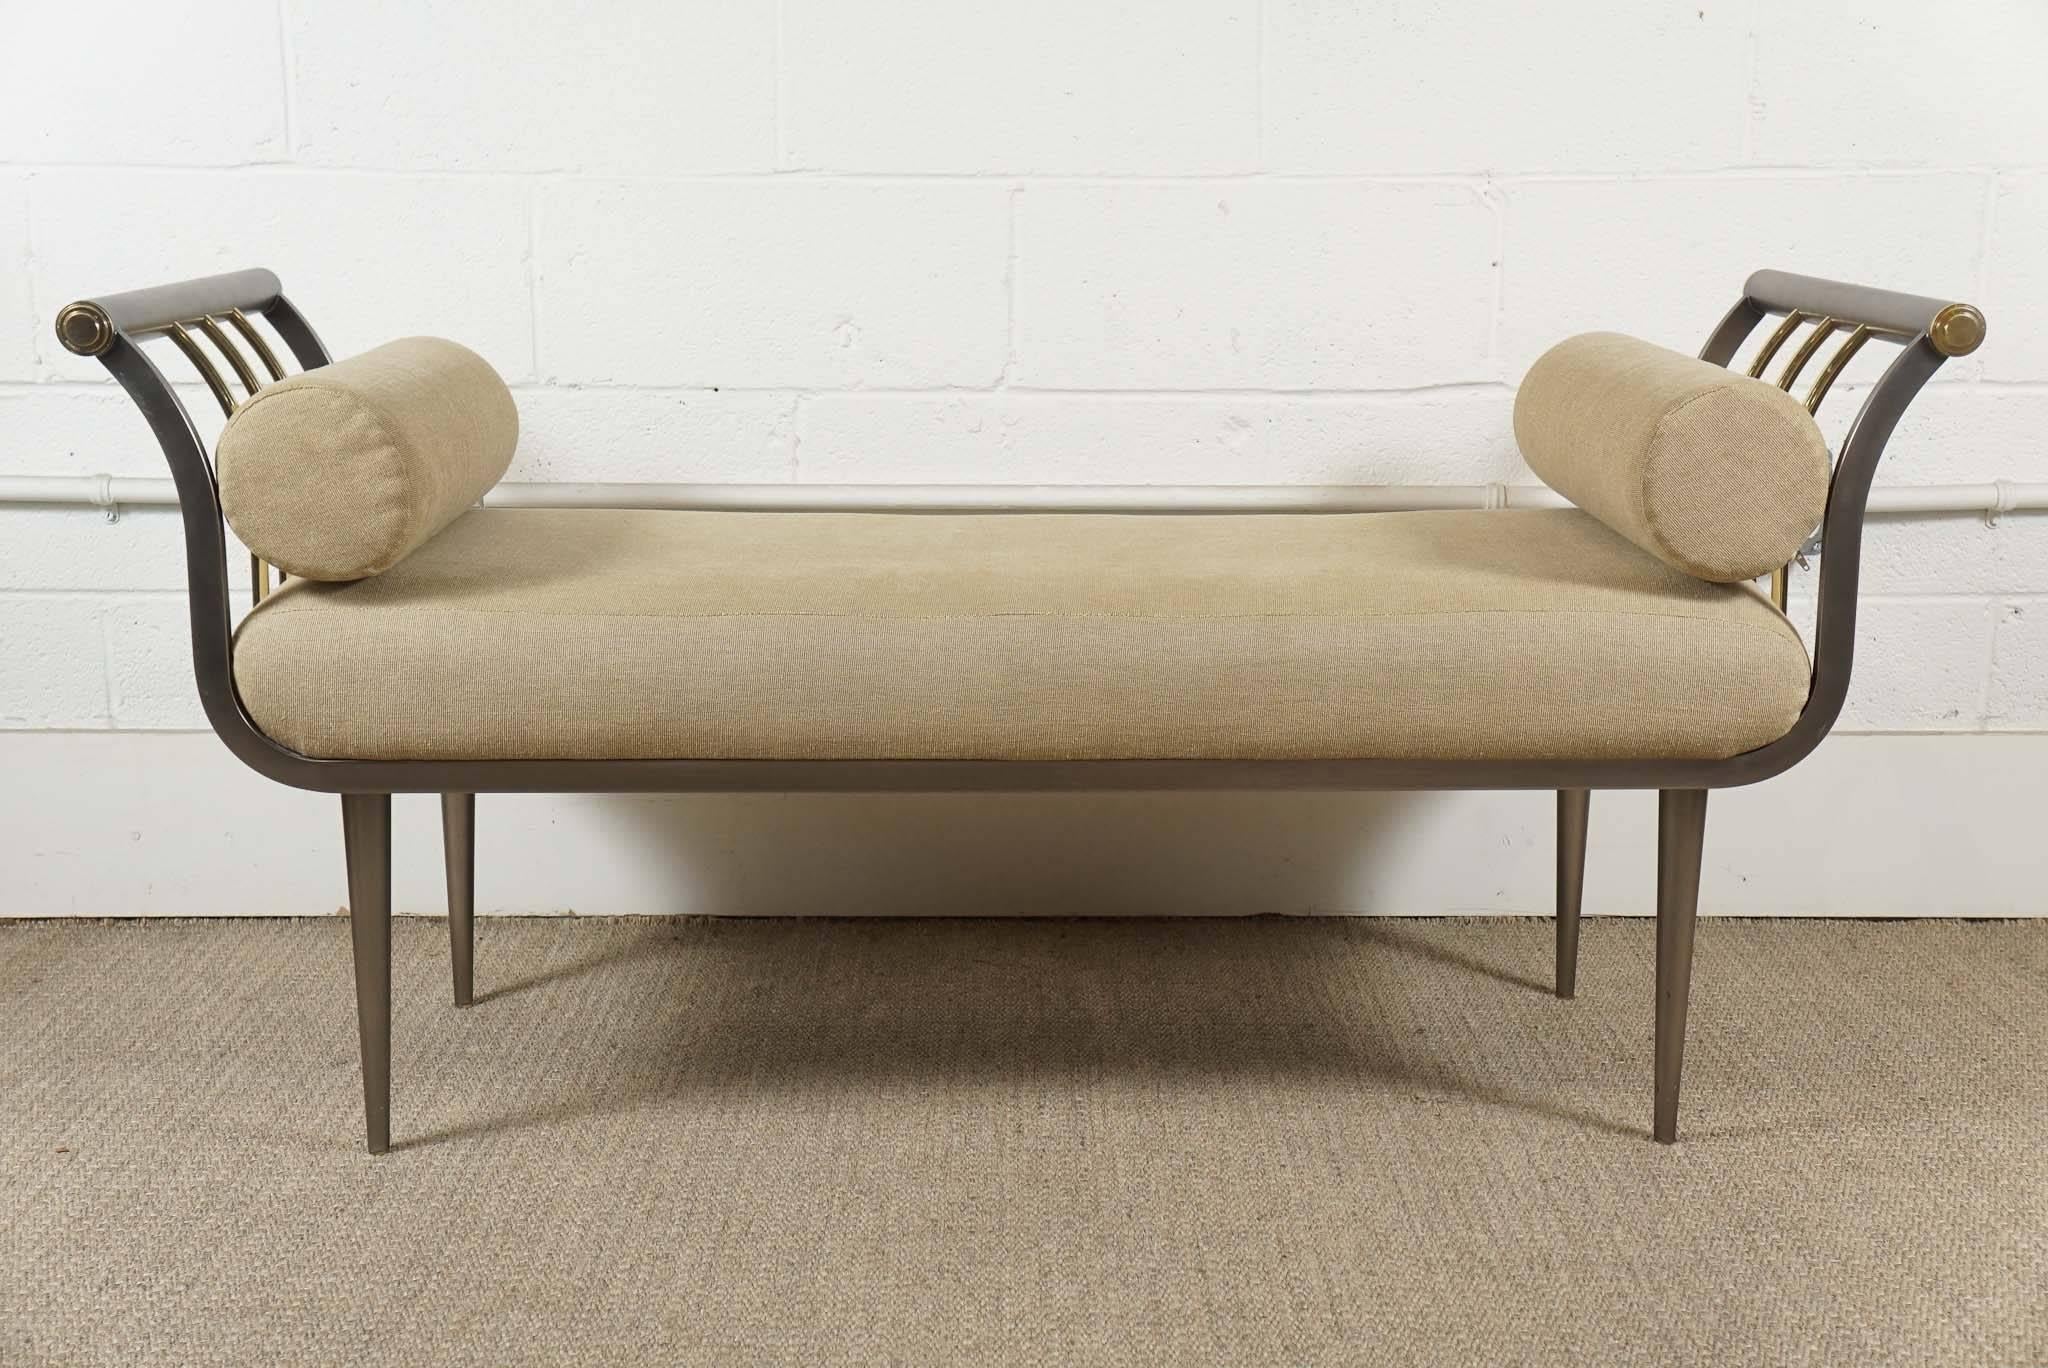 Here is a modern bench with elegant arms in a stainless steel finish and brass accents. The upholstered seat is attached and there are two bolster pillows.